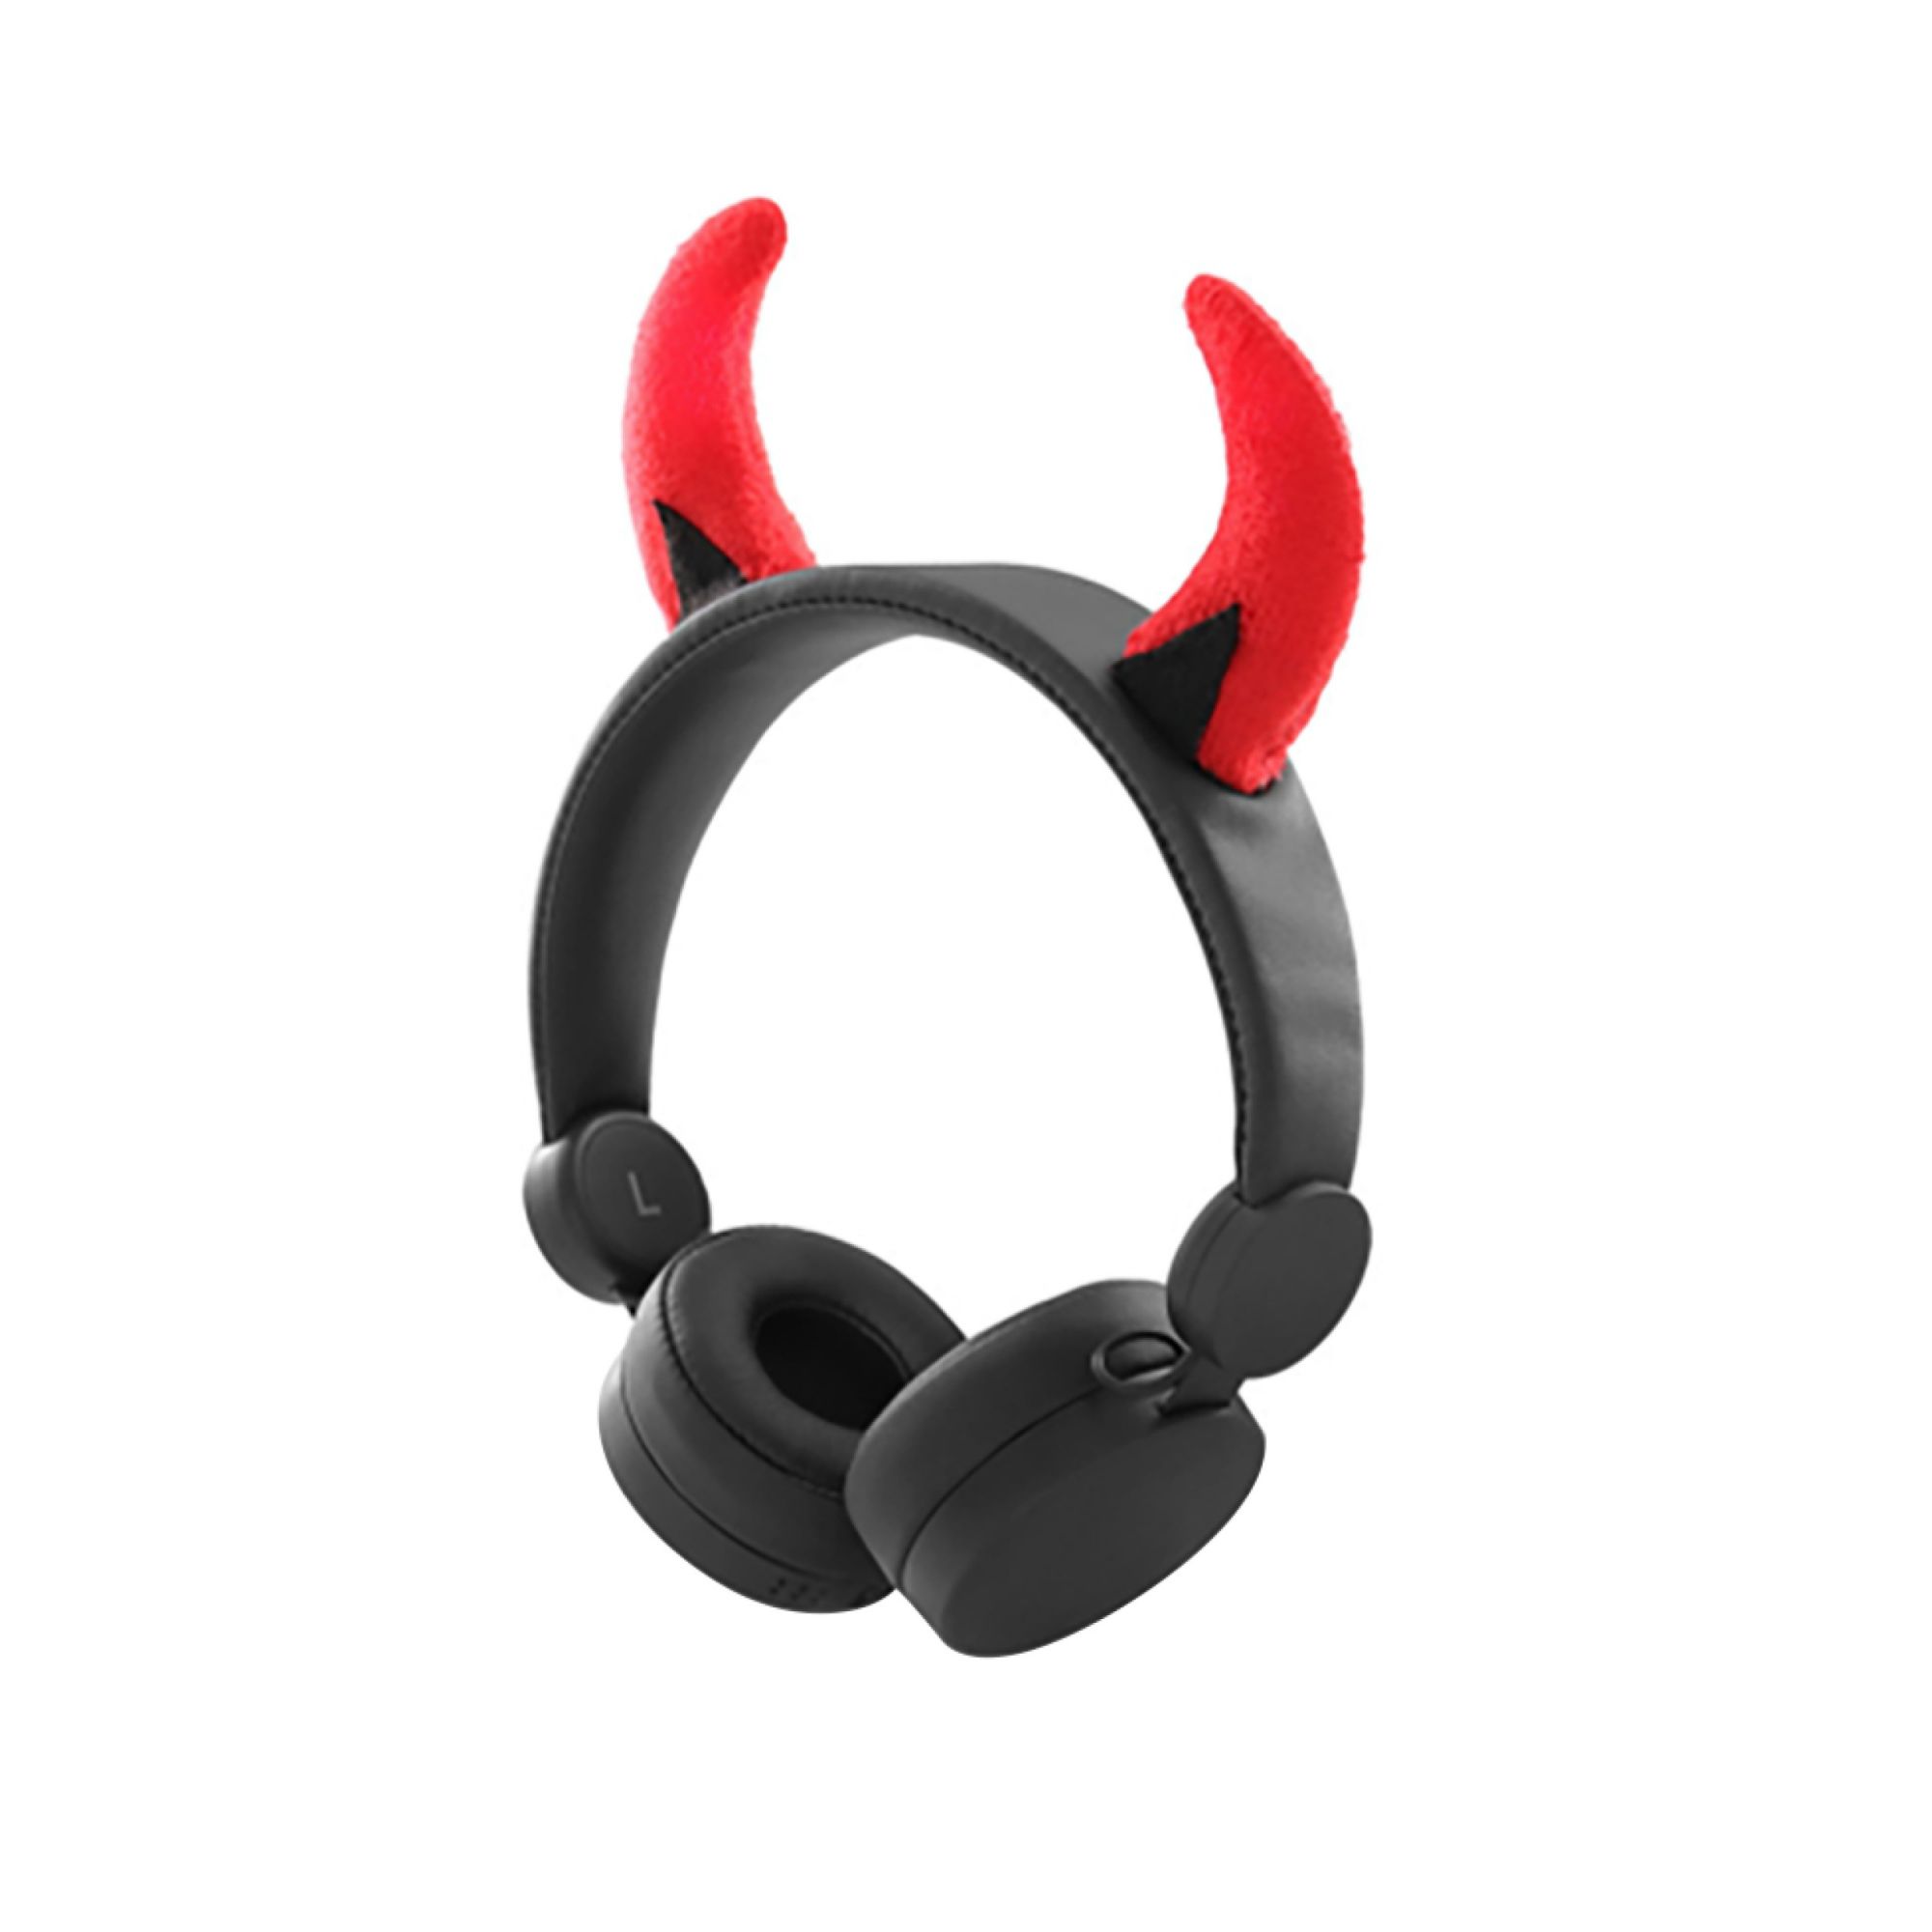 Casque audio filaire diable Kidyears - Made in Bébé